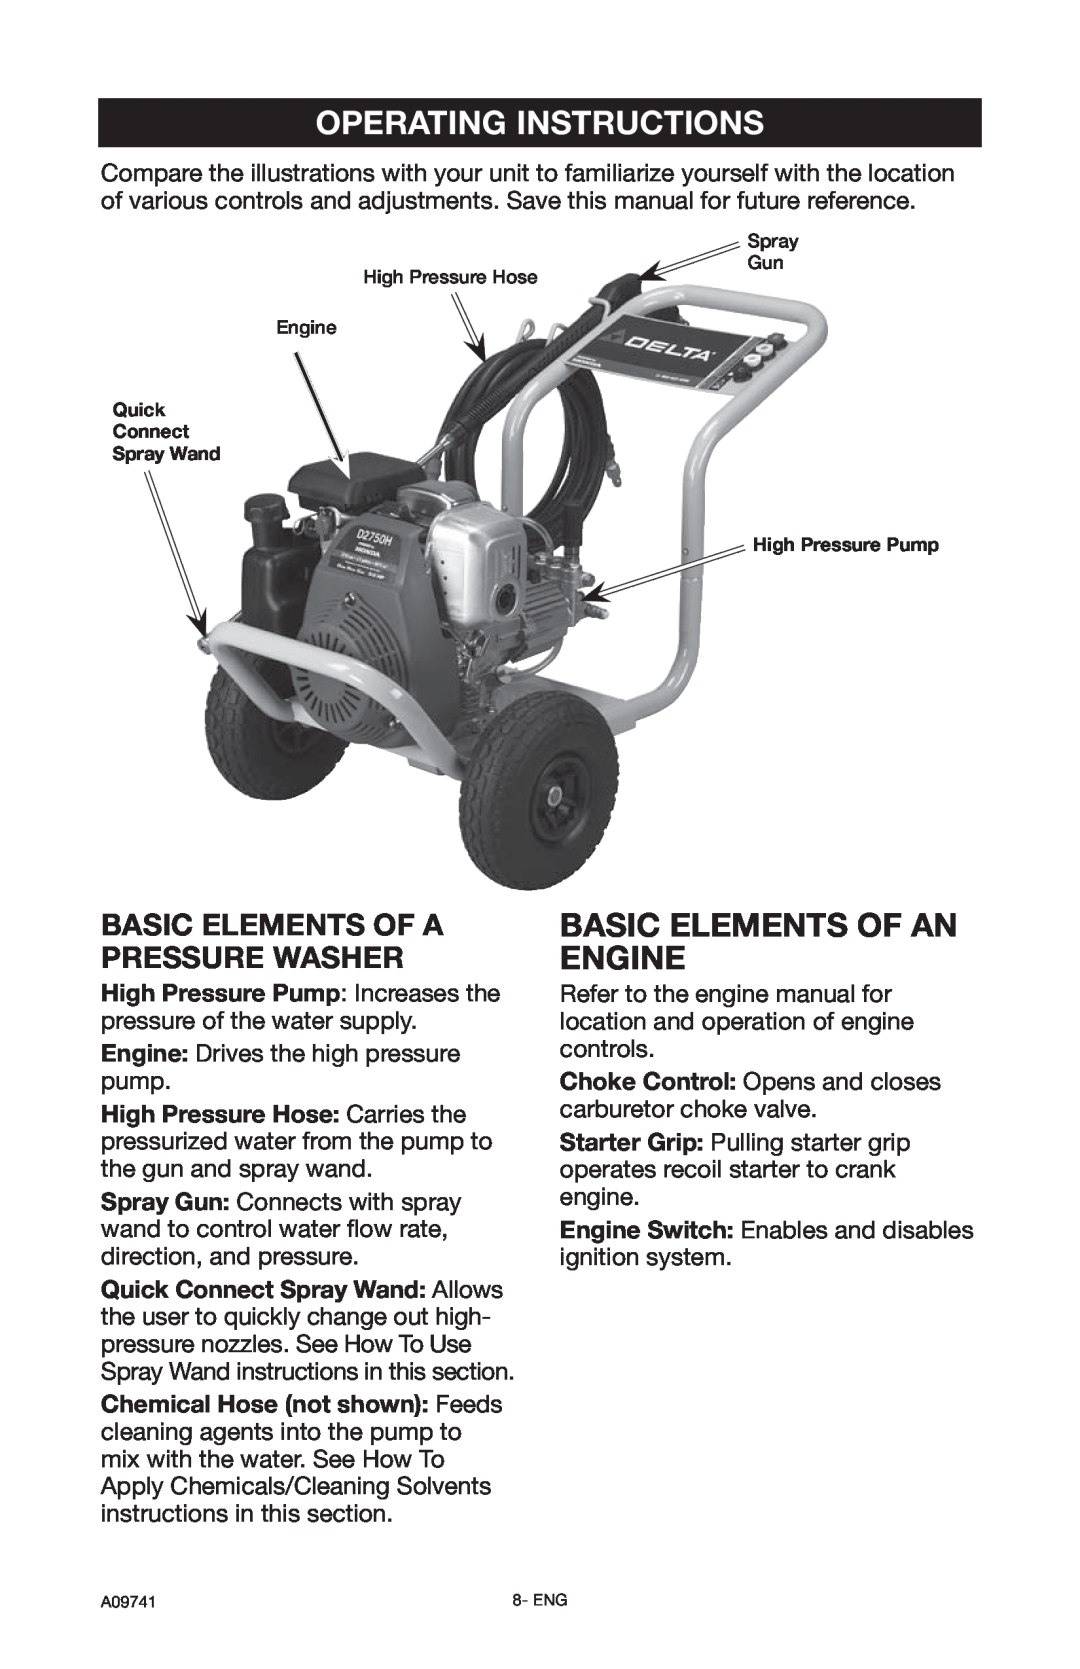 Delta D2750H instruction manual Operating Instructions, Basic Elements Of An Engine, Basic Elements Of A Pressure Washer 